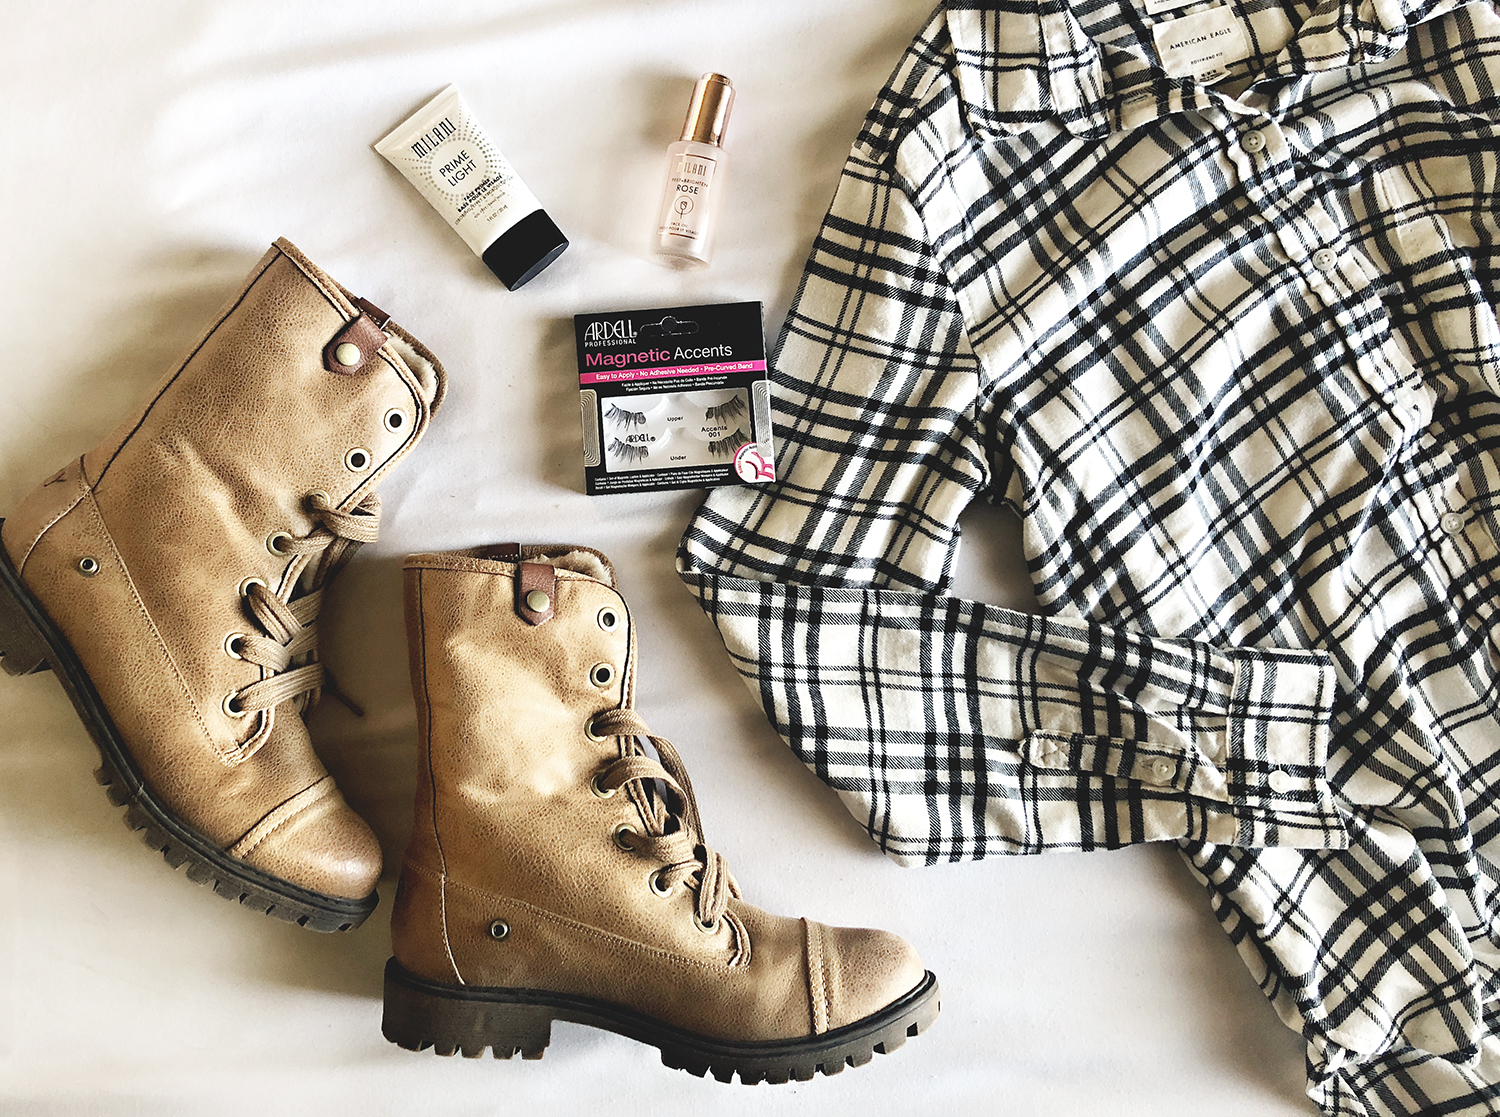 Sharing my latest finds and obsessions for the month of March! From the softest plaid button down to new drugstore makeup finds... you are going to love them! #Milani #MilaniMakeup #Americanagle #Roxy #Boots #ArdellMagneticAccents #FashionFinds #StyleFinds